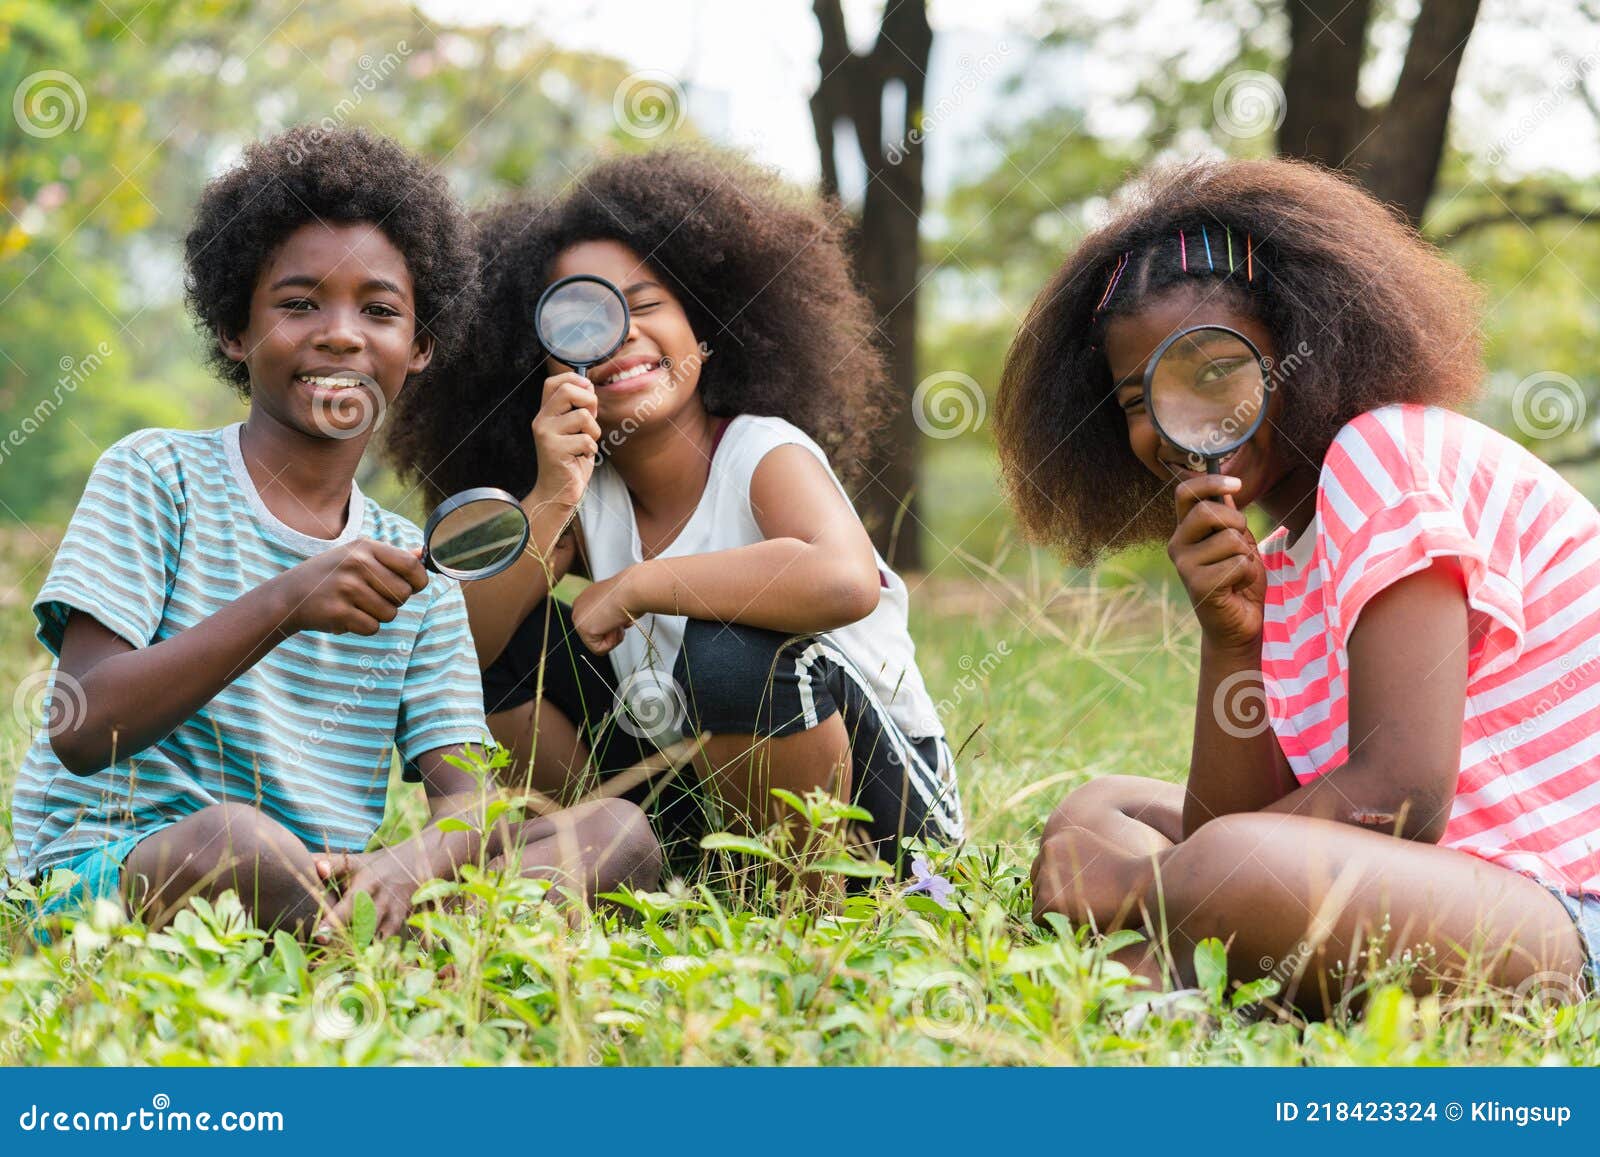 african american children sitting in the grass and looking through the magnifying glass between learn beyond the classroom. .